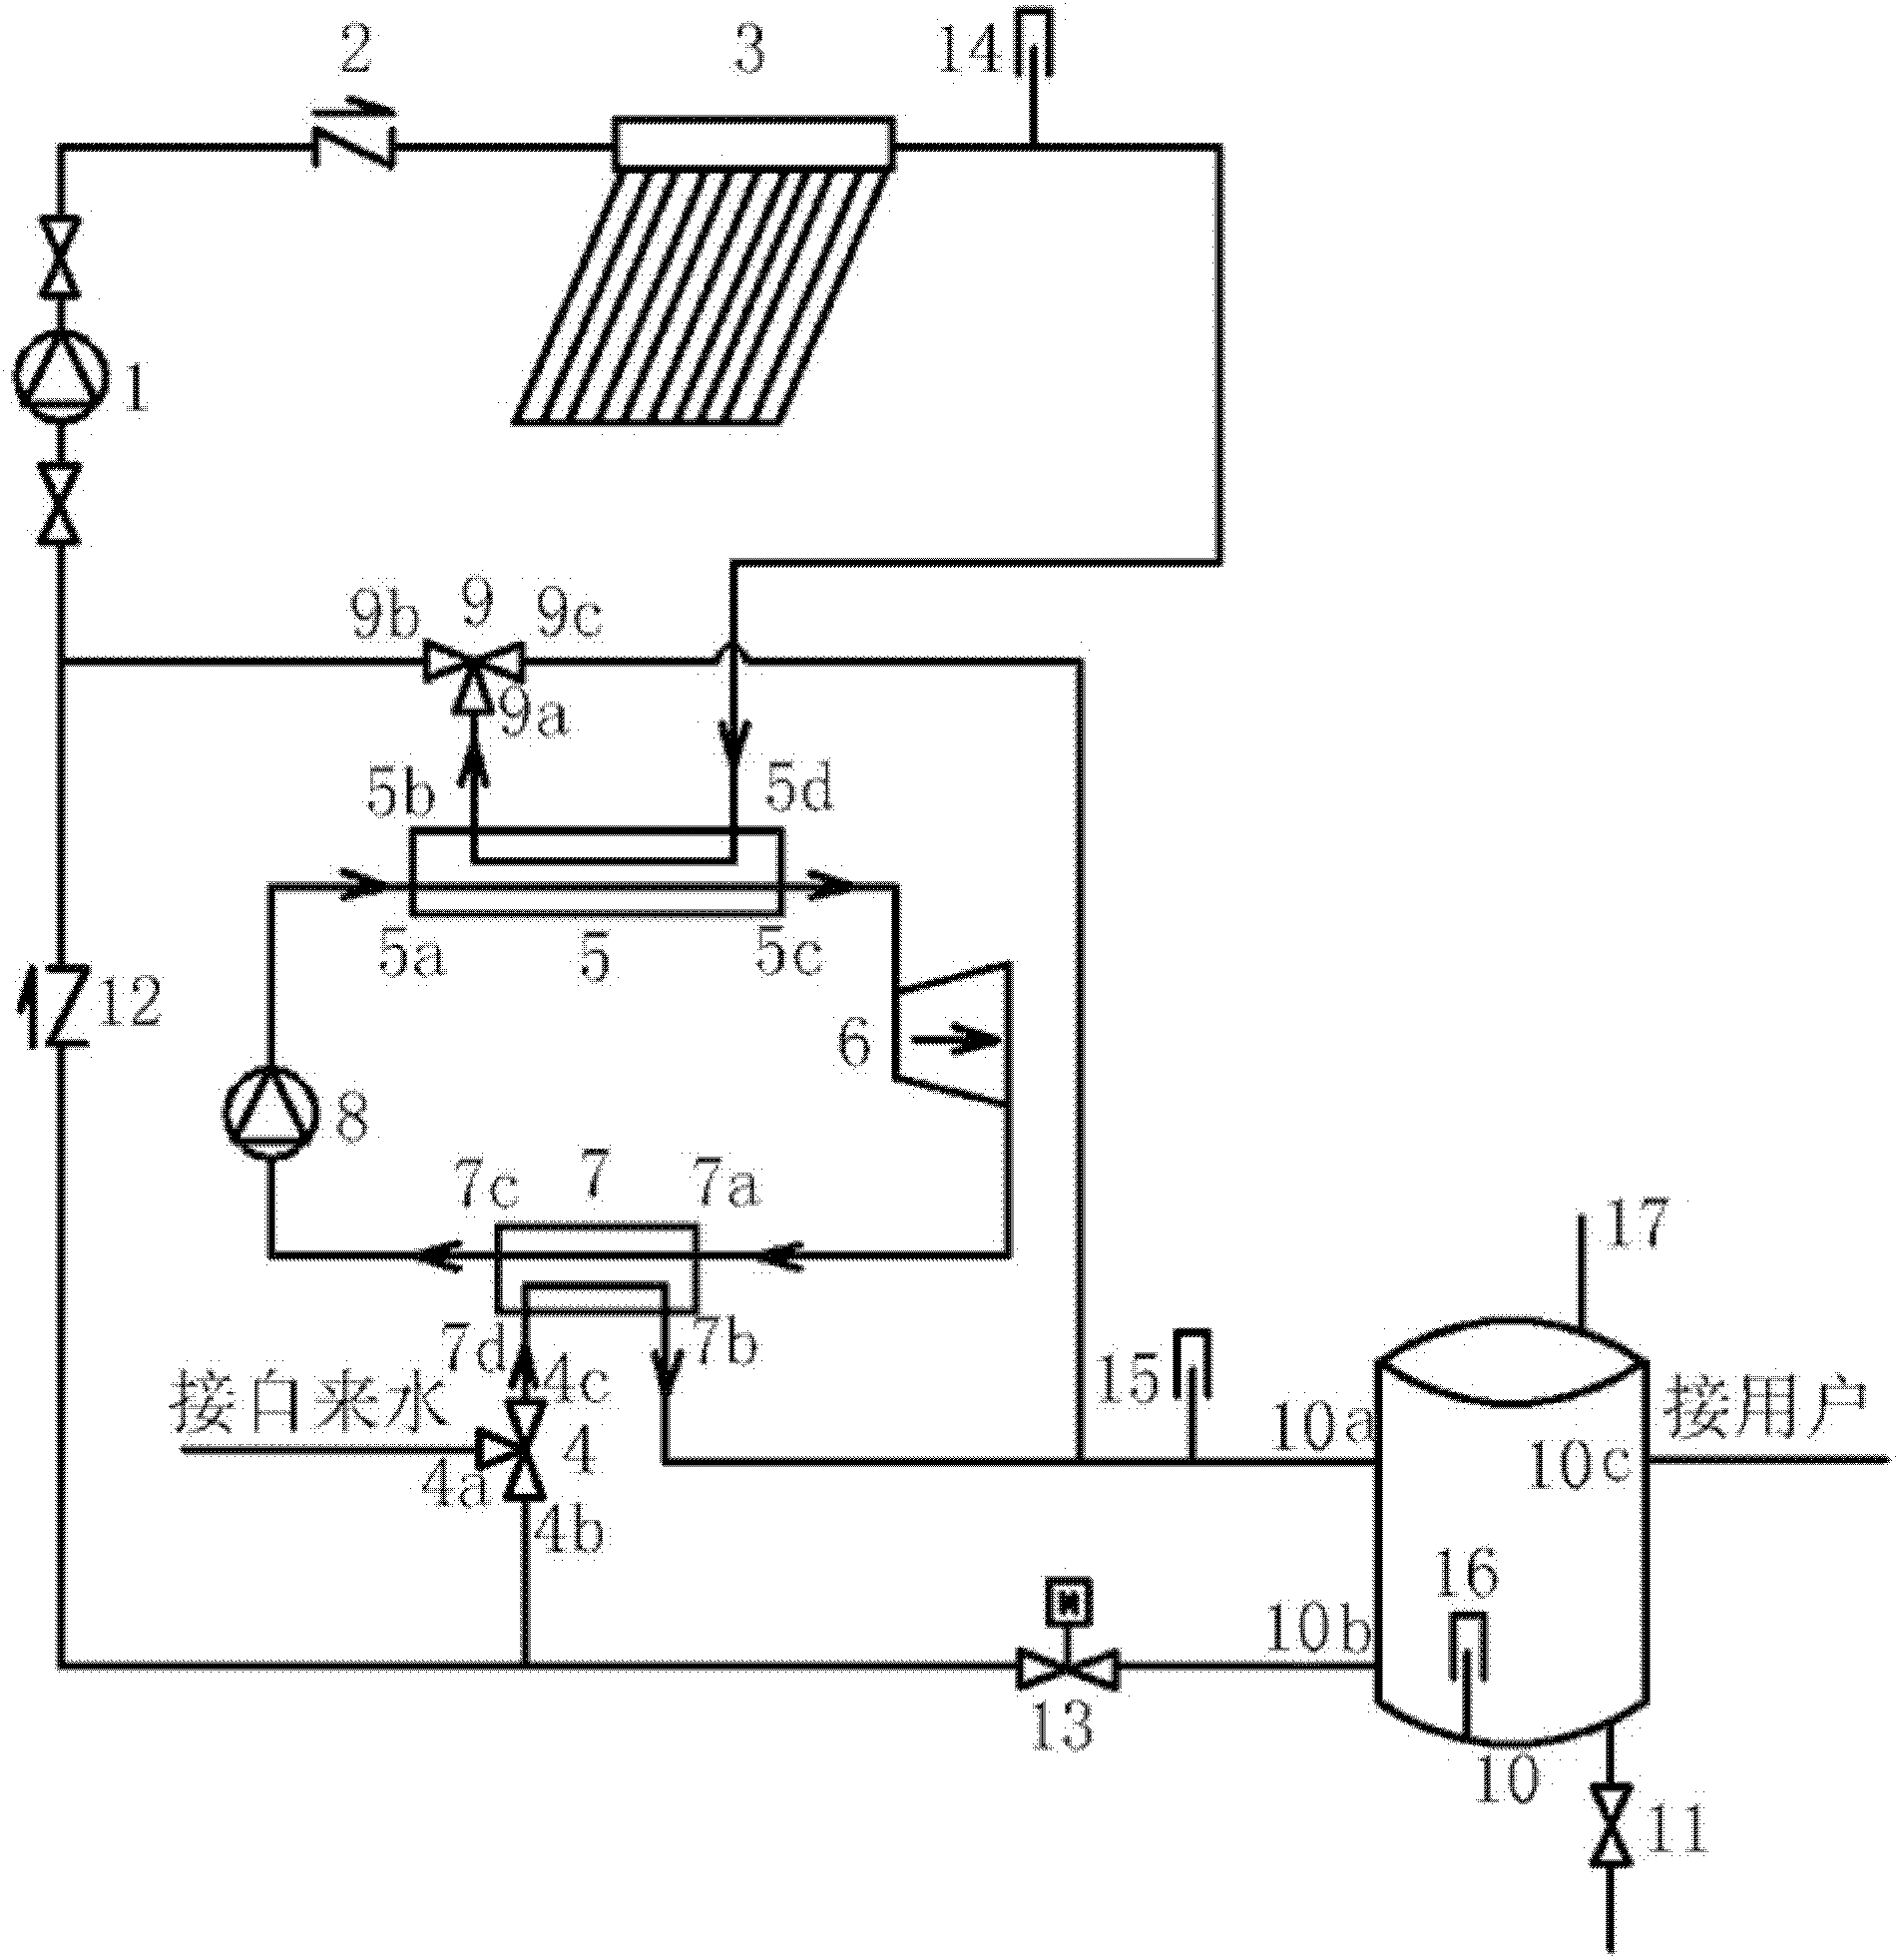 Thermal energy comprehensive utilization device for supplying hot water and generating power through solar energy